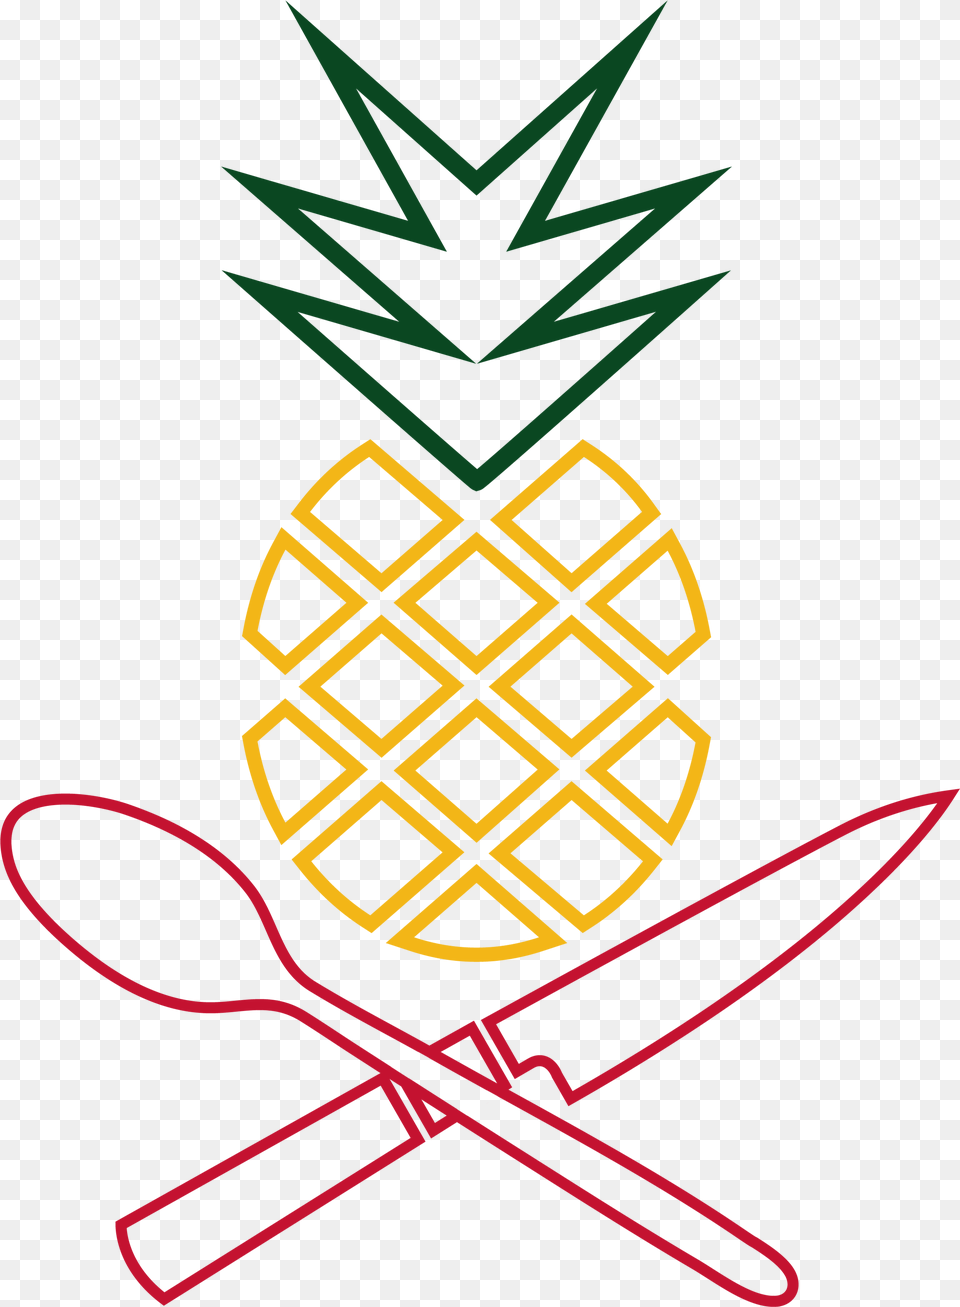 The Pineapple Sticker Braden Williams, Food, Fruit, Plant, Produce Png